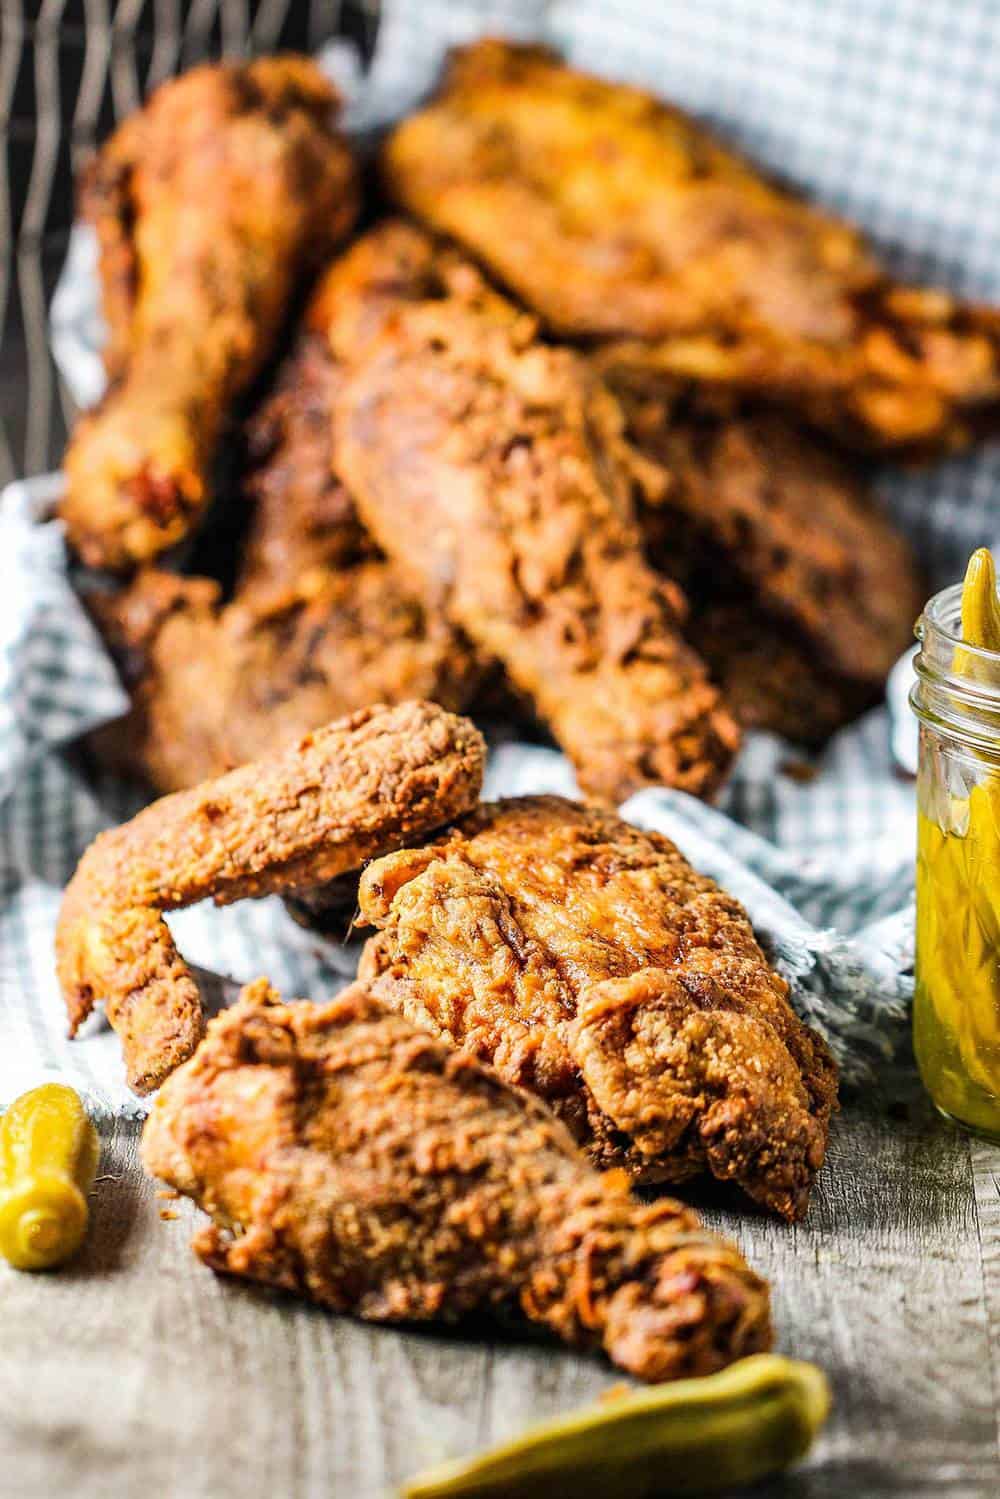 A basket turned on its side with Southern fried chicken